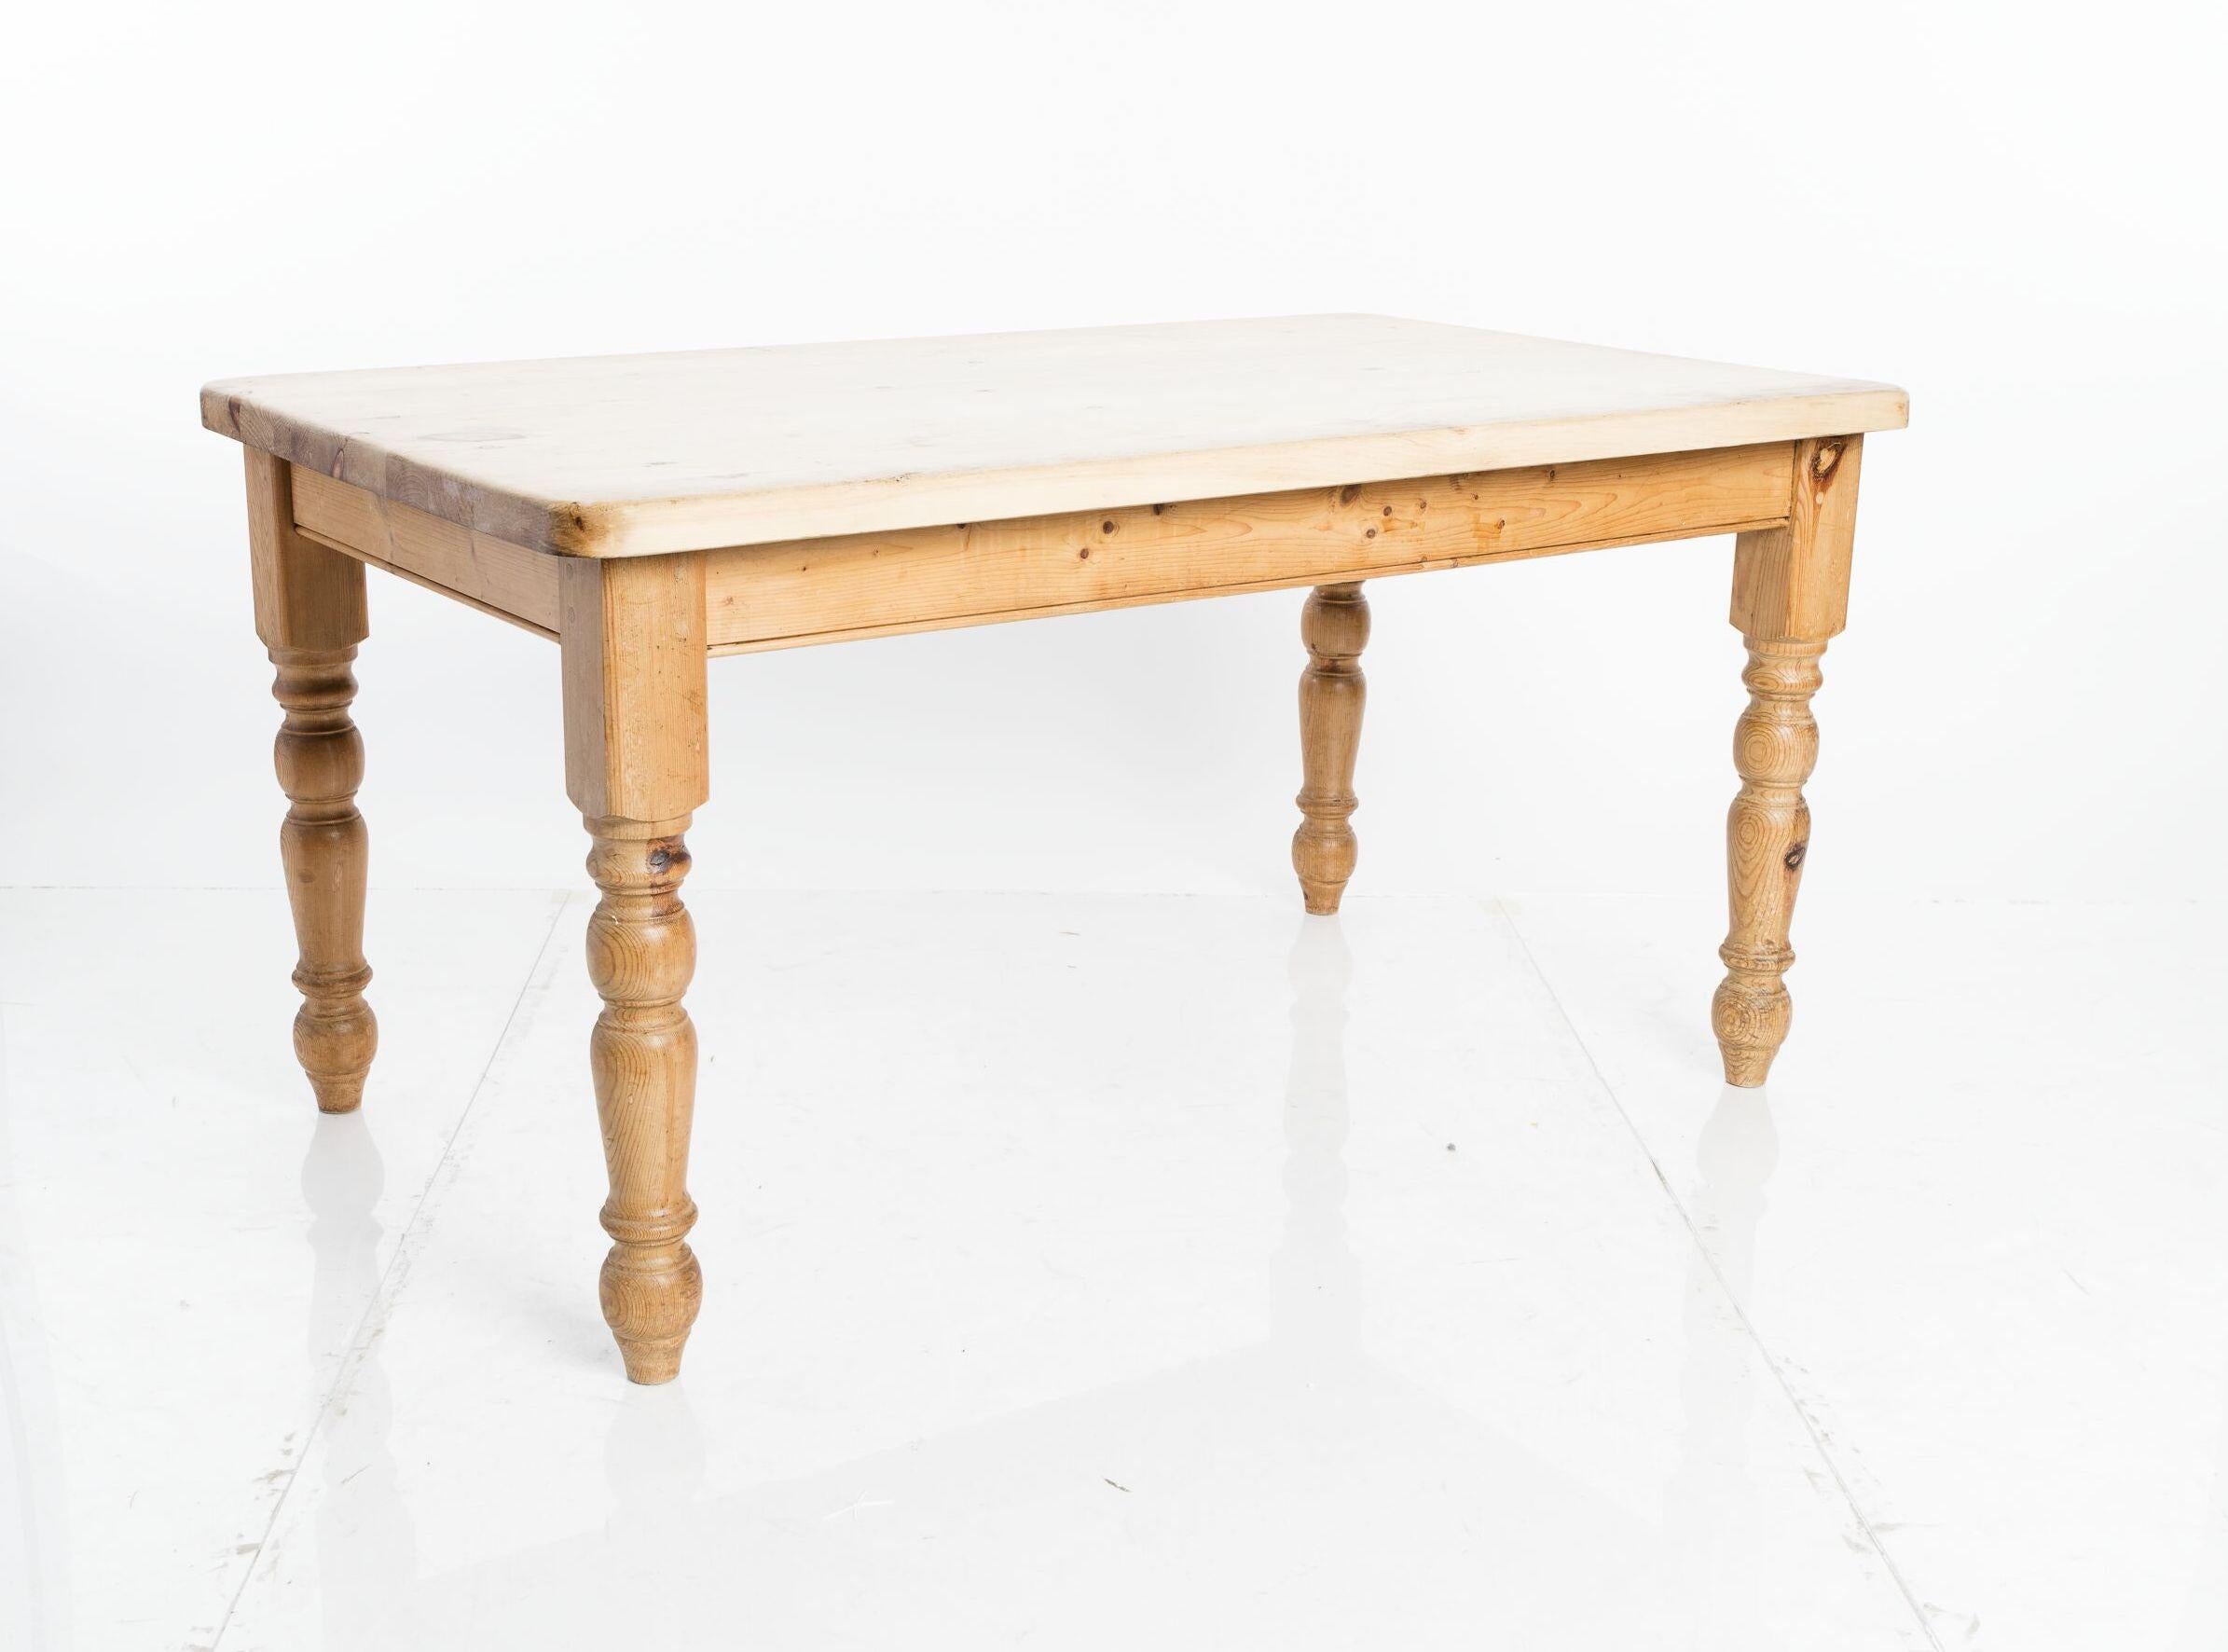 English pine dining table, circa 1880. A beautifully maintained knotty pine top.